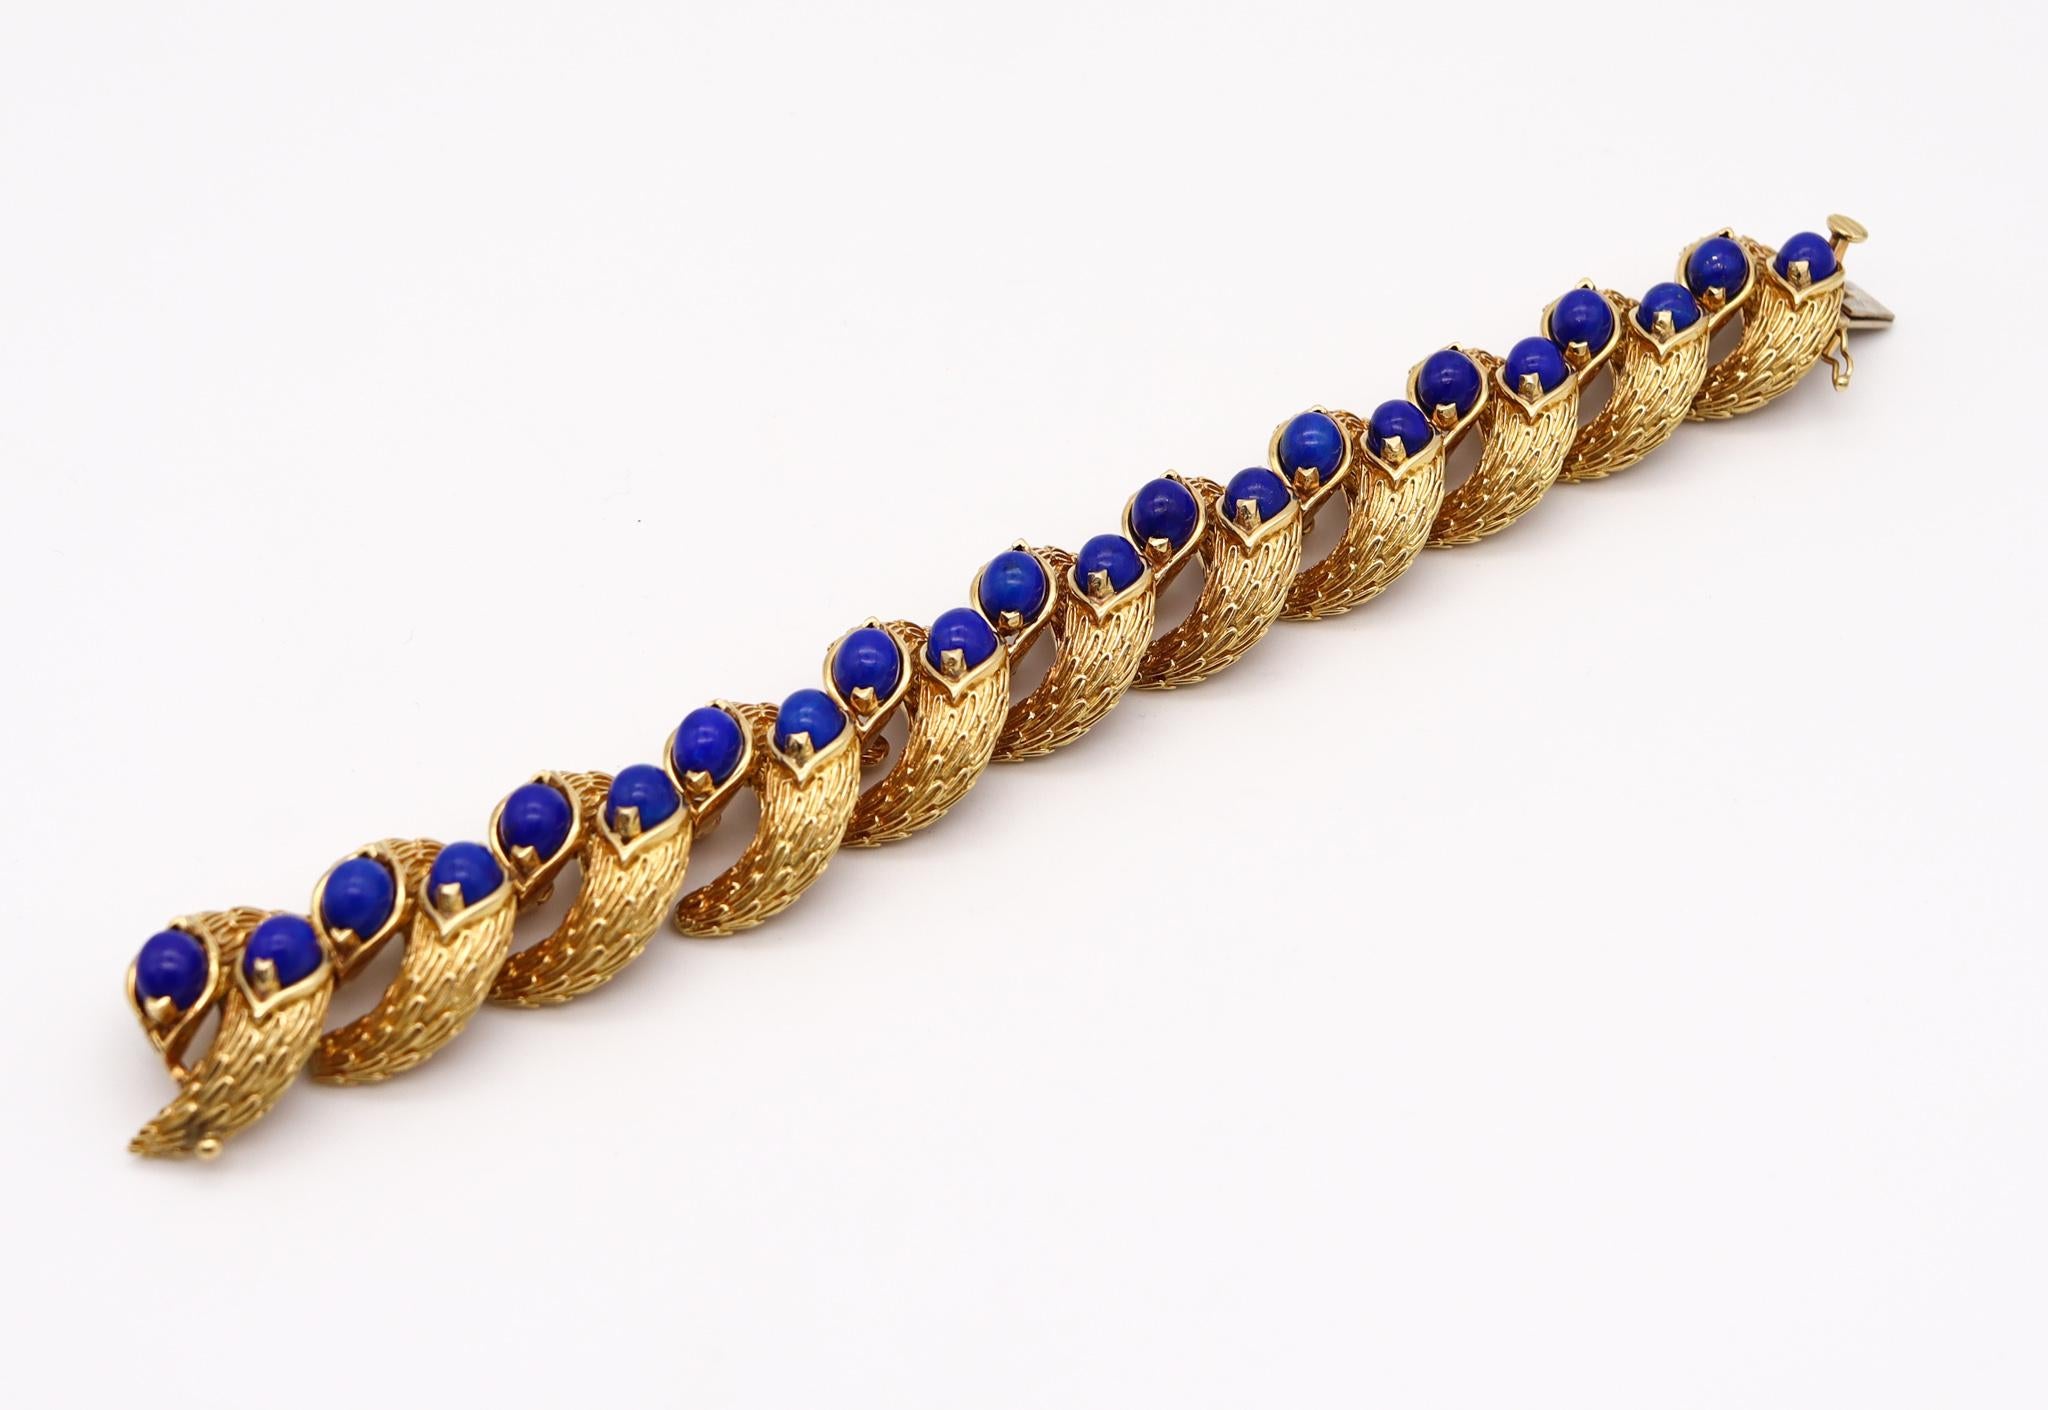 Cabochon Carlo Weingrill 1960 Byzantine Bracelet in 18Kt Yellow Gold with Lapis Lazuli For Sale